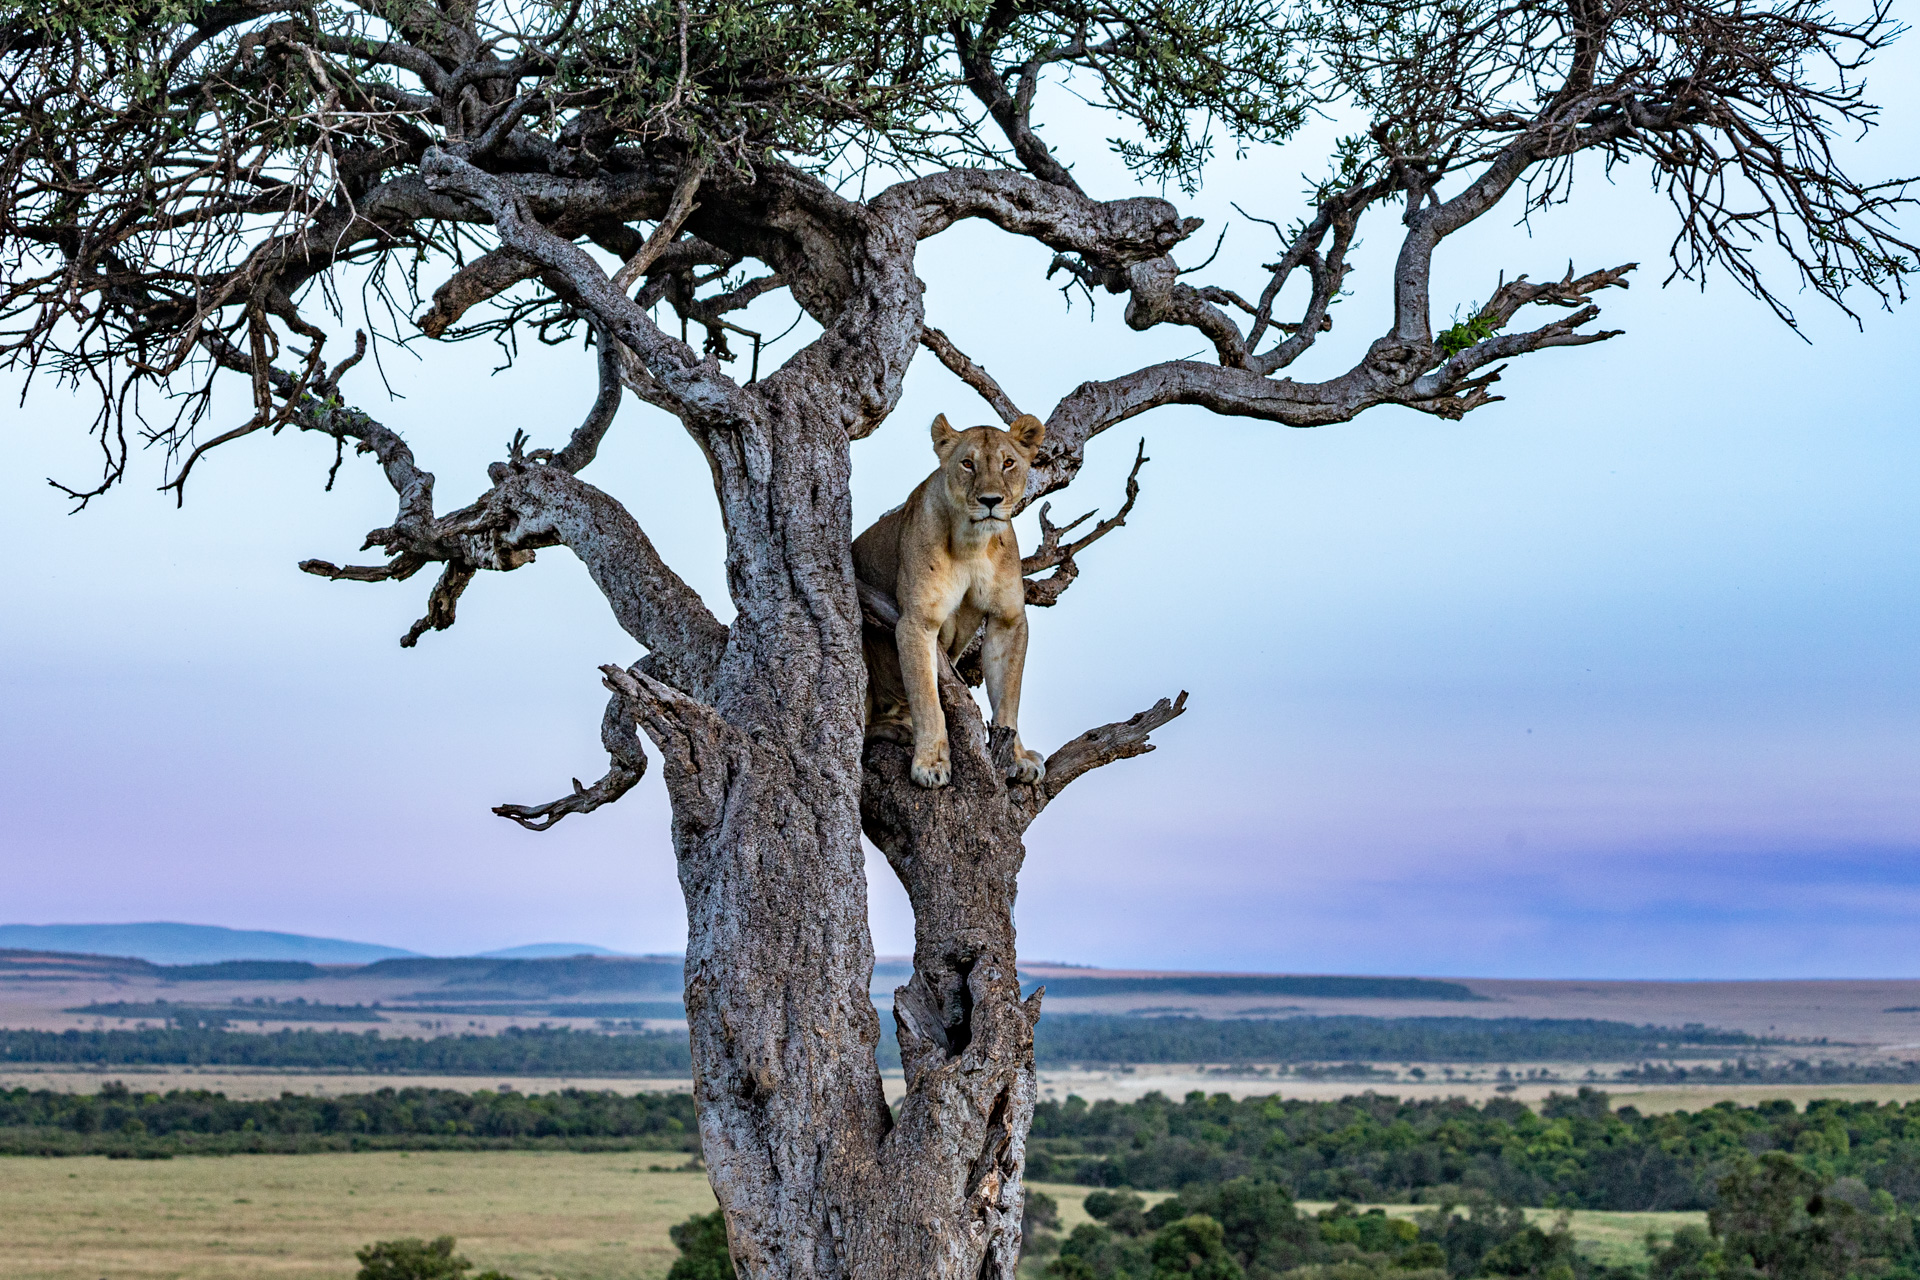 Above: The Angama Lioness up to her usual tricks 